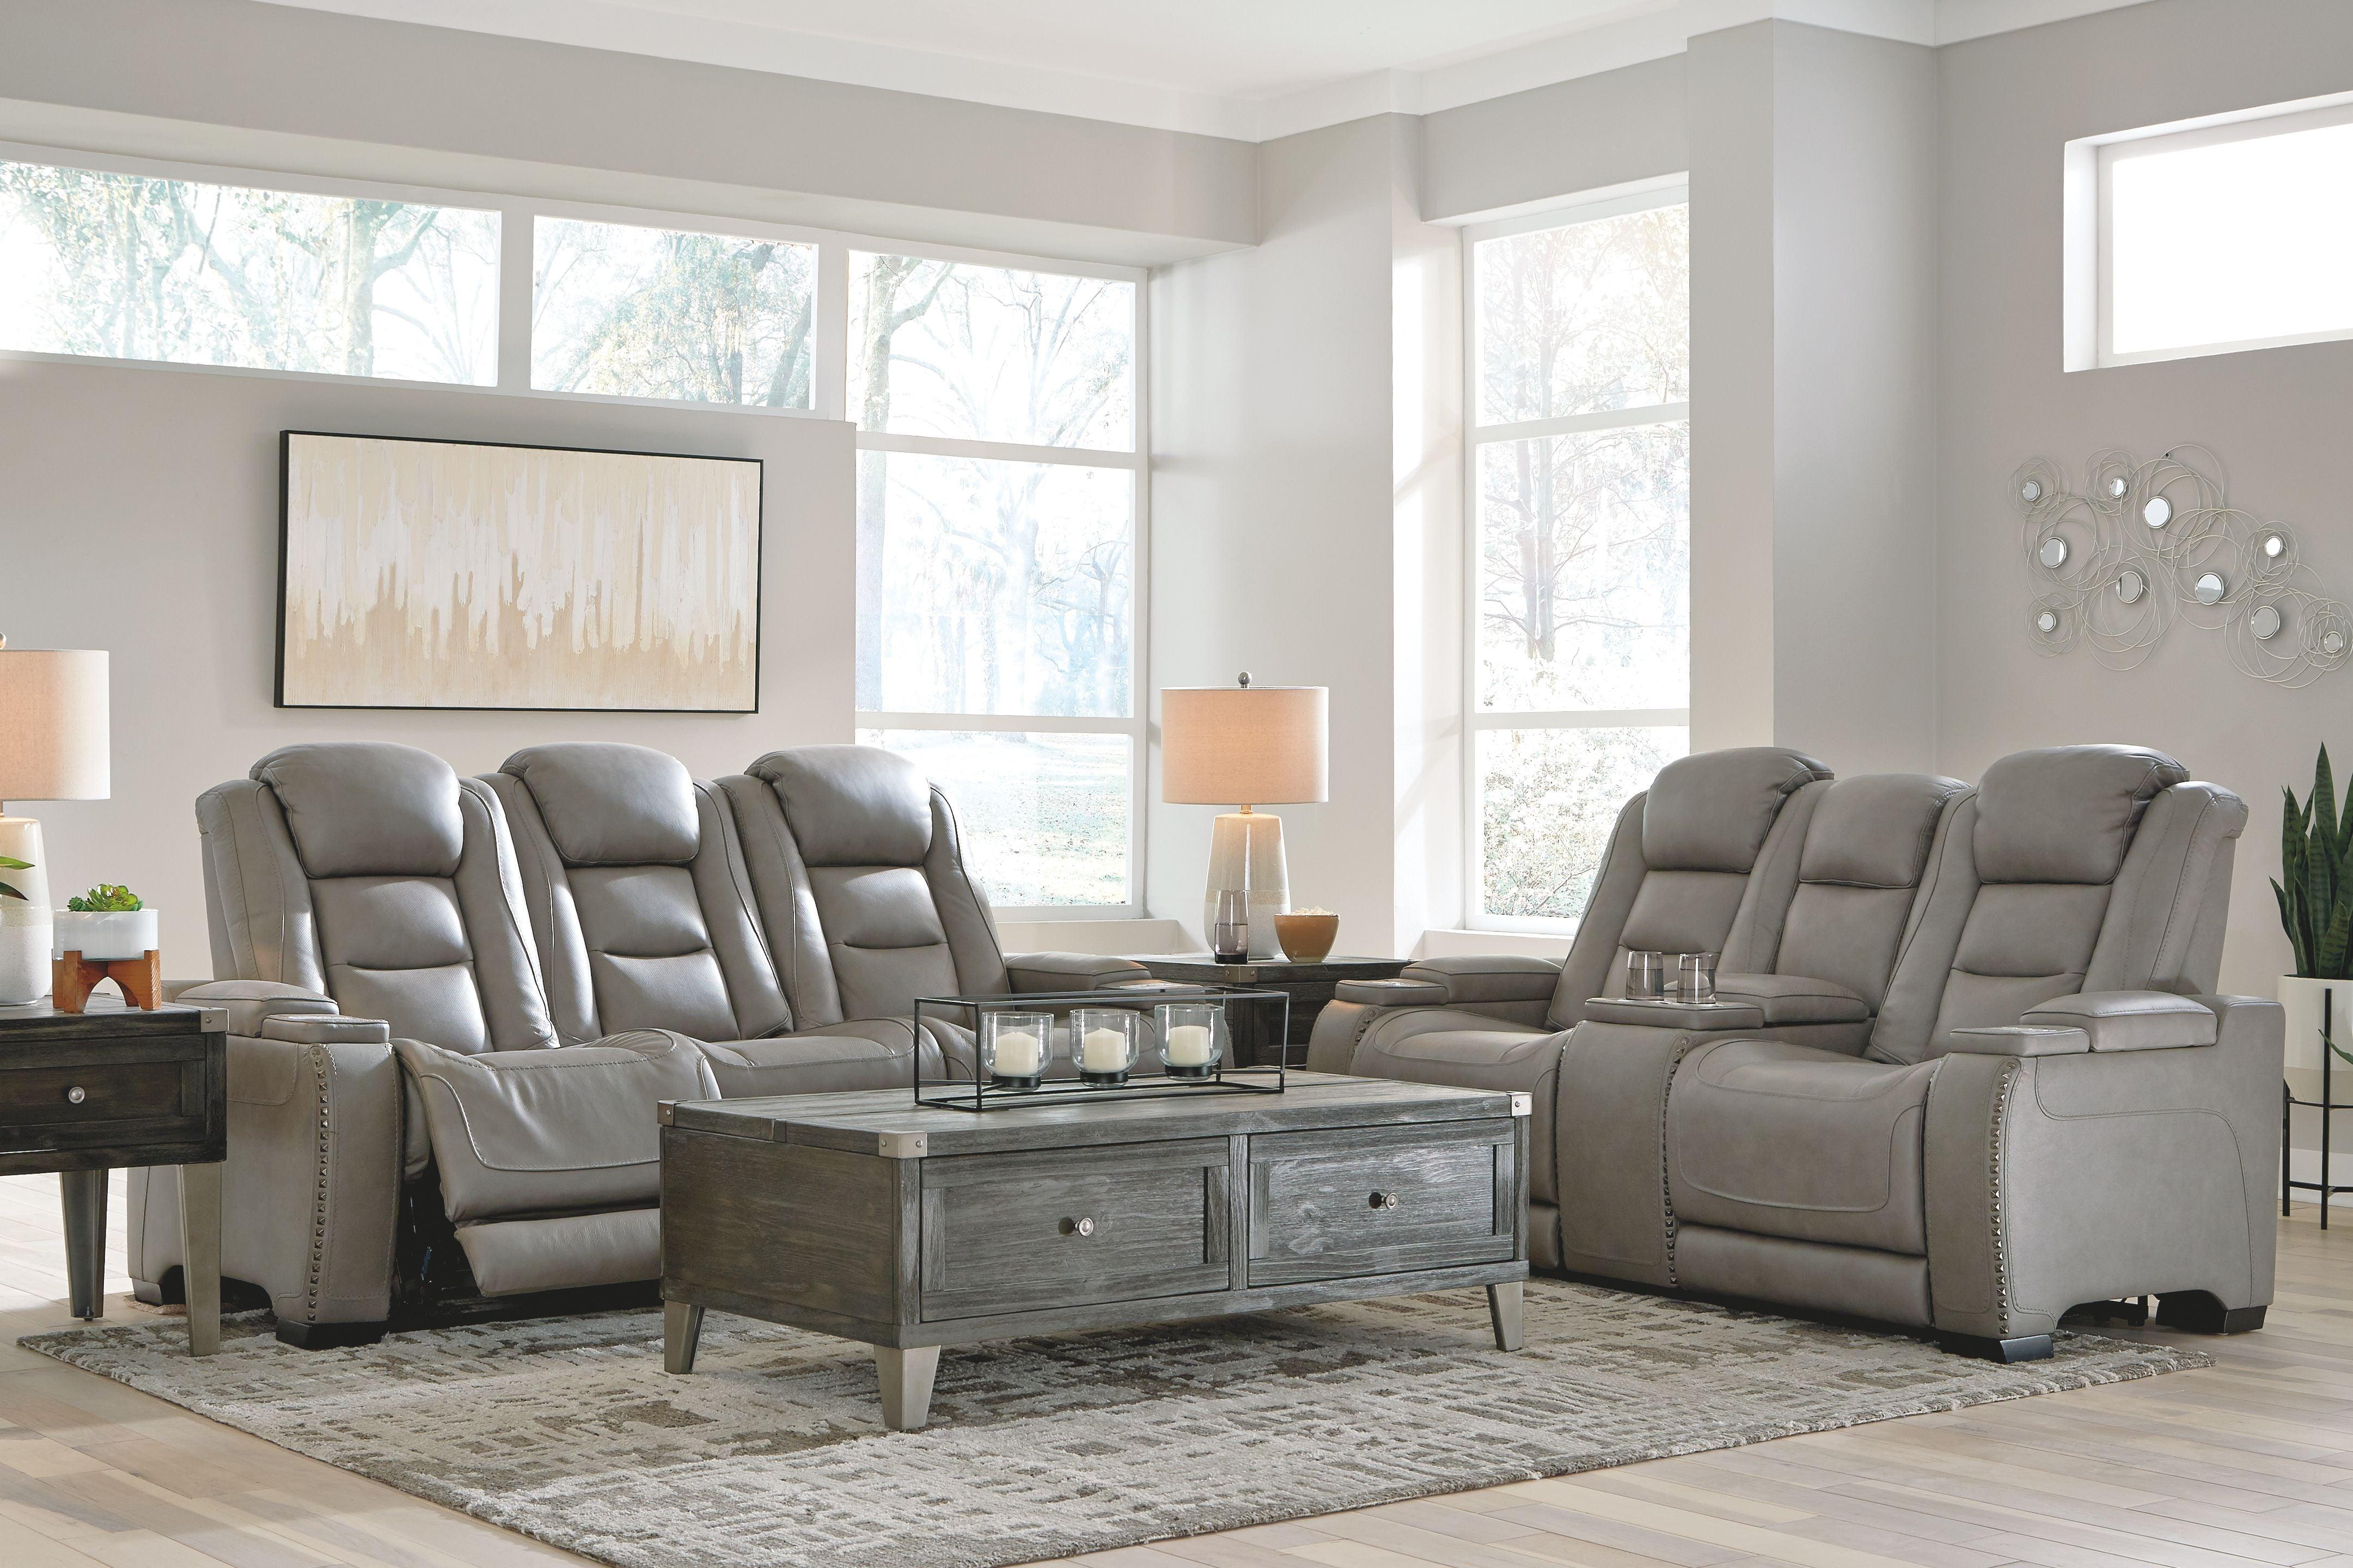 Signature Design by Ashley® - The Man-den - Reclining Living Room Set - 5th Avenue Furniture